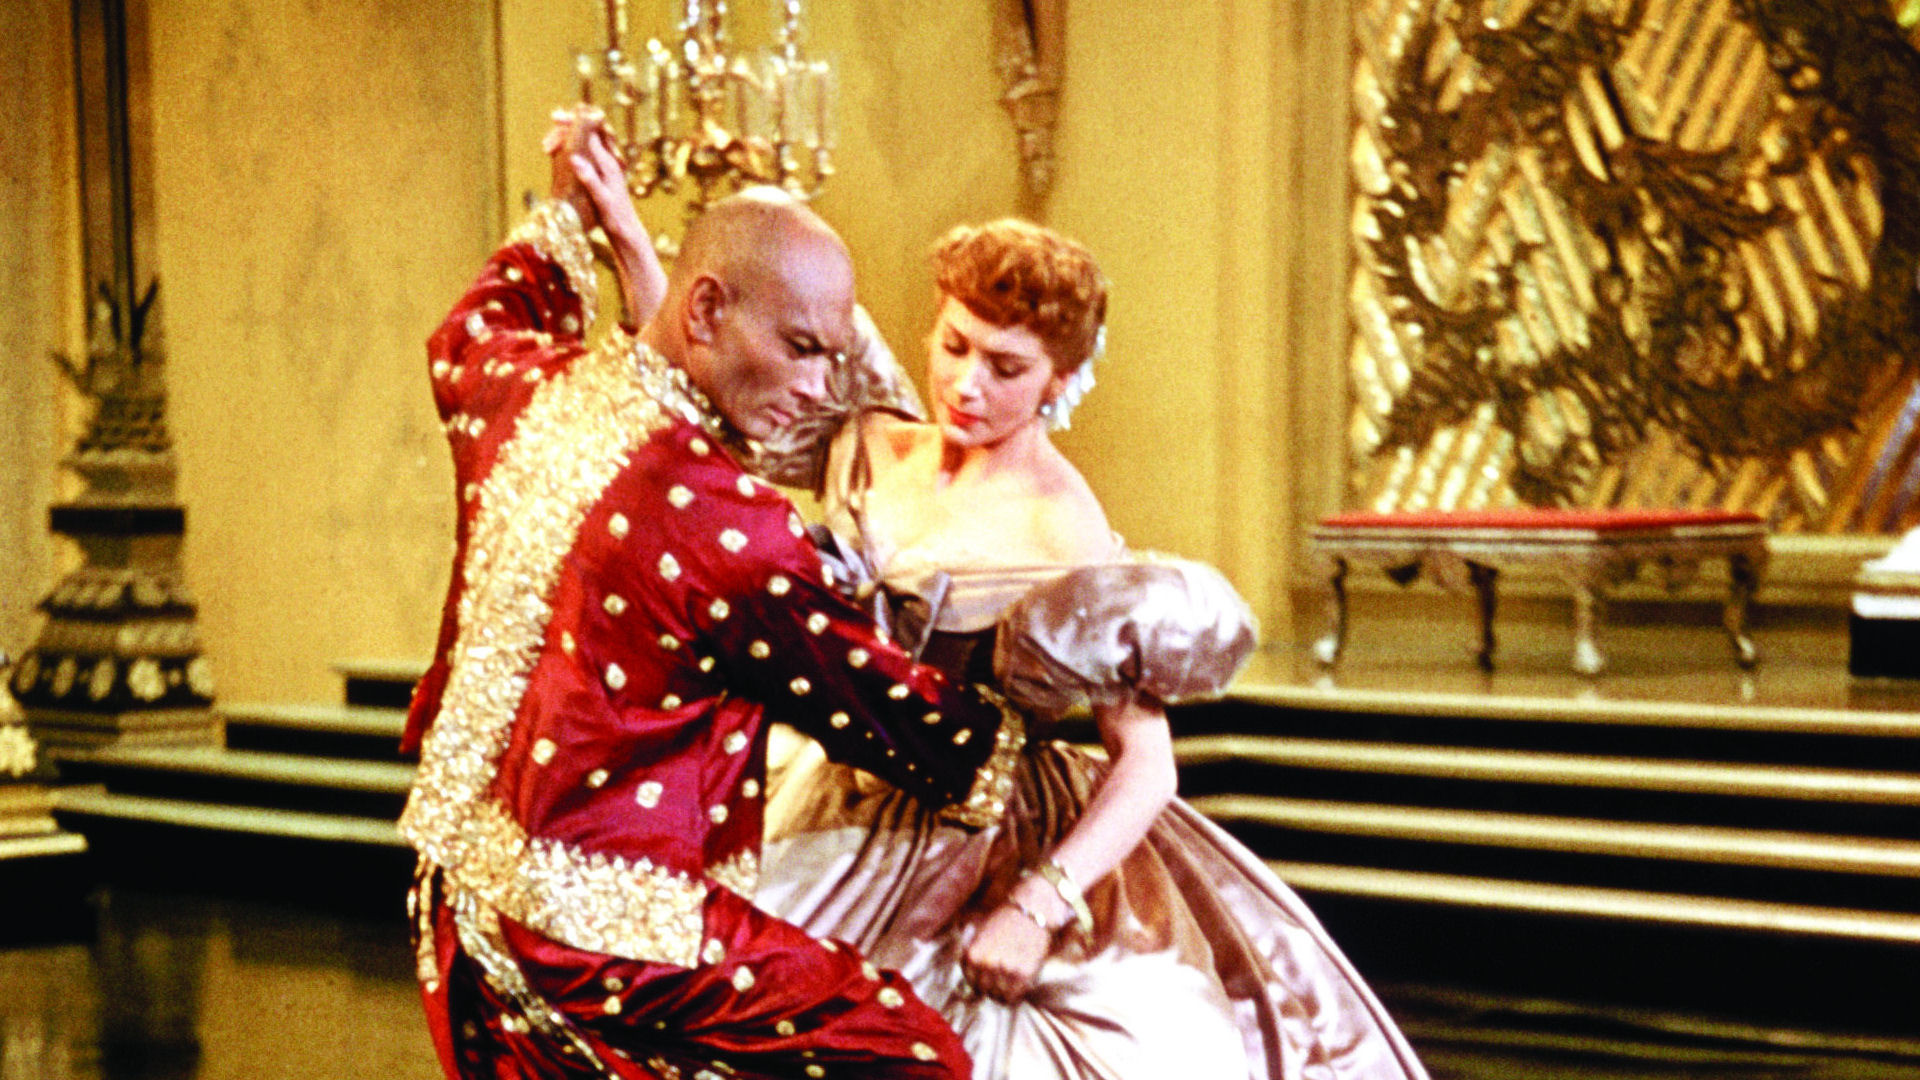 Some will always romanticize "The King and I." It seems kind of like a Beauty and the Beast-type fantasy, but that's exactly the problem. Banned in Thailand, the movie (and original production) is accused of displaying a severely warped image of Thai people, and King Mongkut in particular as an arrogant, ignorant tyrant. Even though actor Yul Brynner (who is of some Asian heritage) was cast as the King, he still was not of Thai descent. Then of course, you have the overall theme of the story. A high-class, white western woman is brought to the east to teach the children of an Asian ruler, which grants them a "real" education. And in the process, she "civilizes" the King himself.